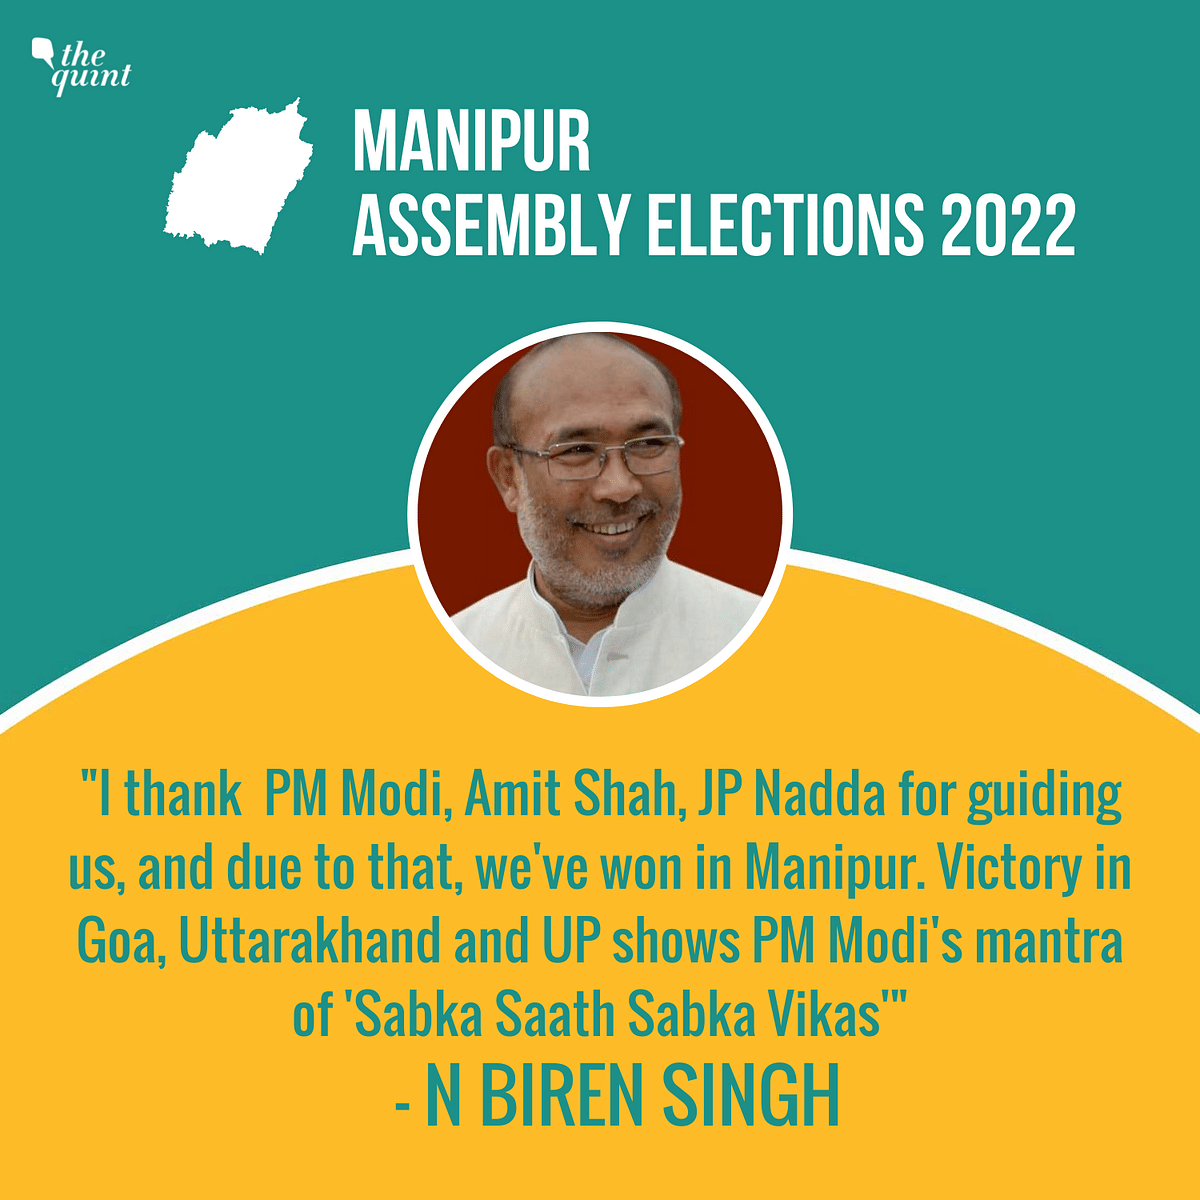 Catch all the live updates of 2022 Manipur Assembly election results here.